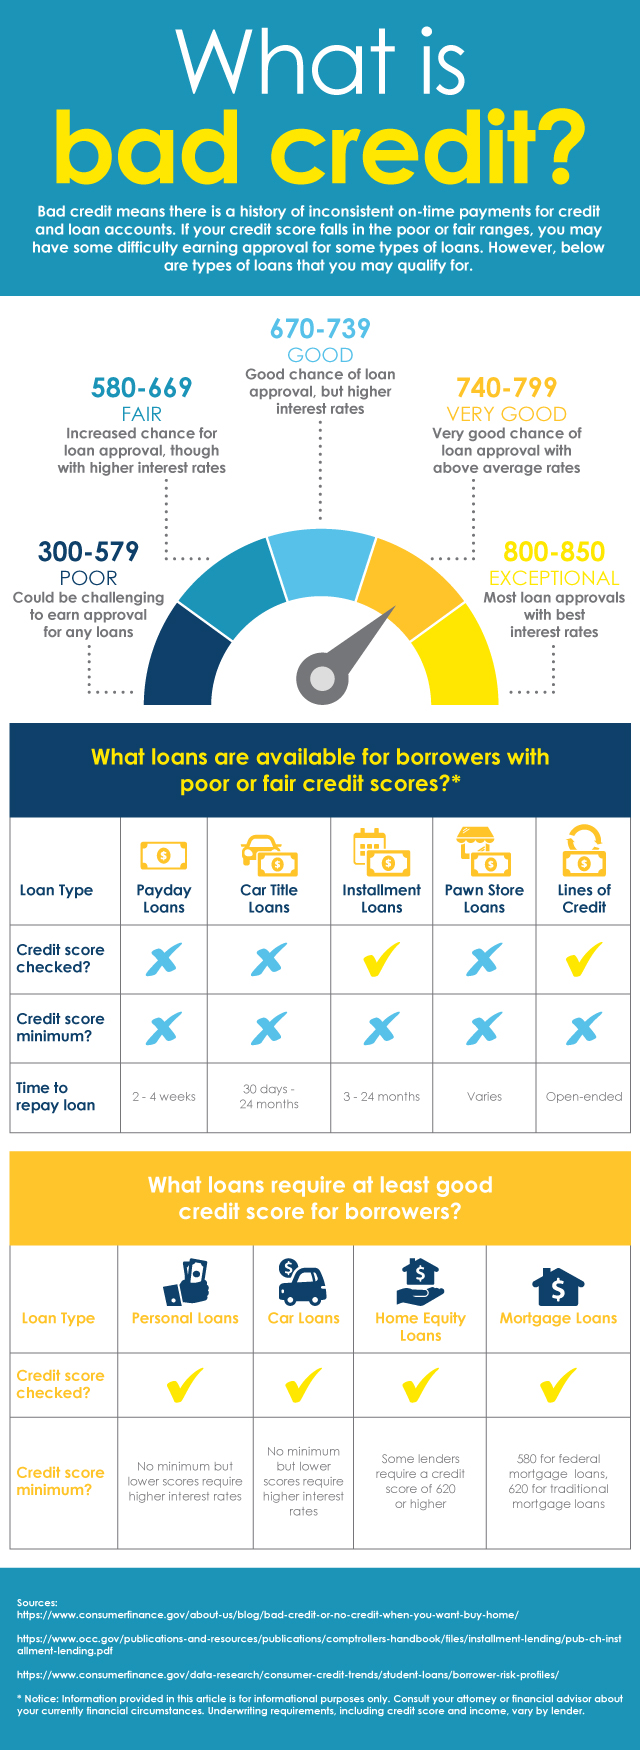 Loan options available for borrowers with bad credit